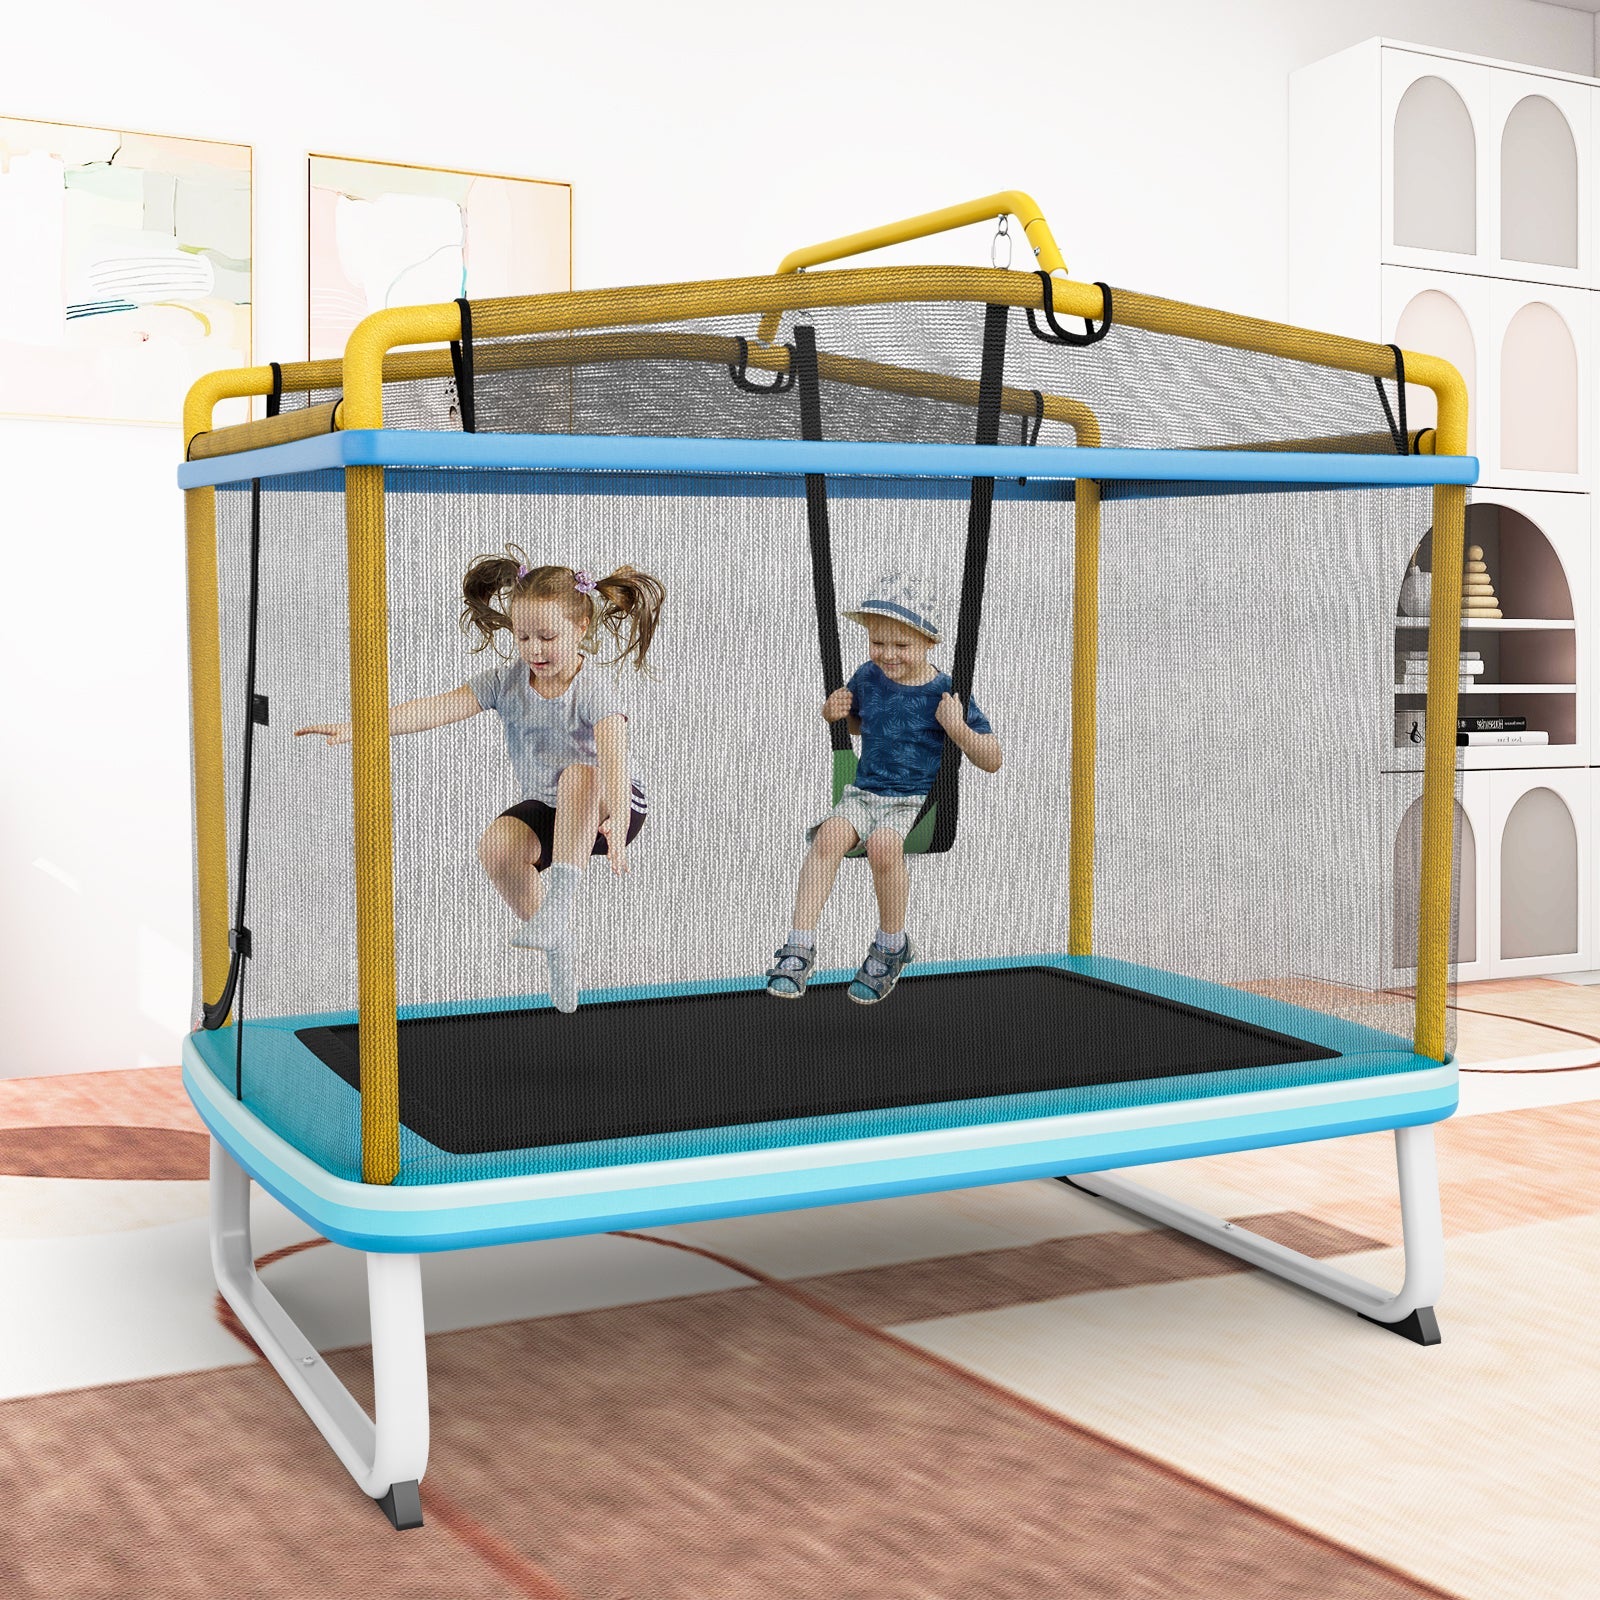 Swing into Joy: 3-in-1 Rectangle Trampoline with Swing & Horizontal Bar Yellow